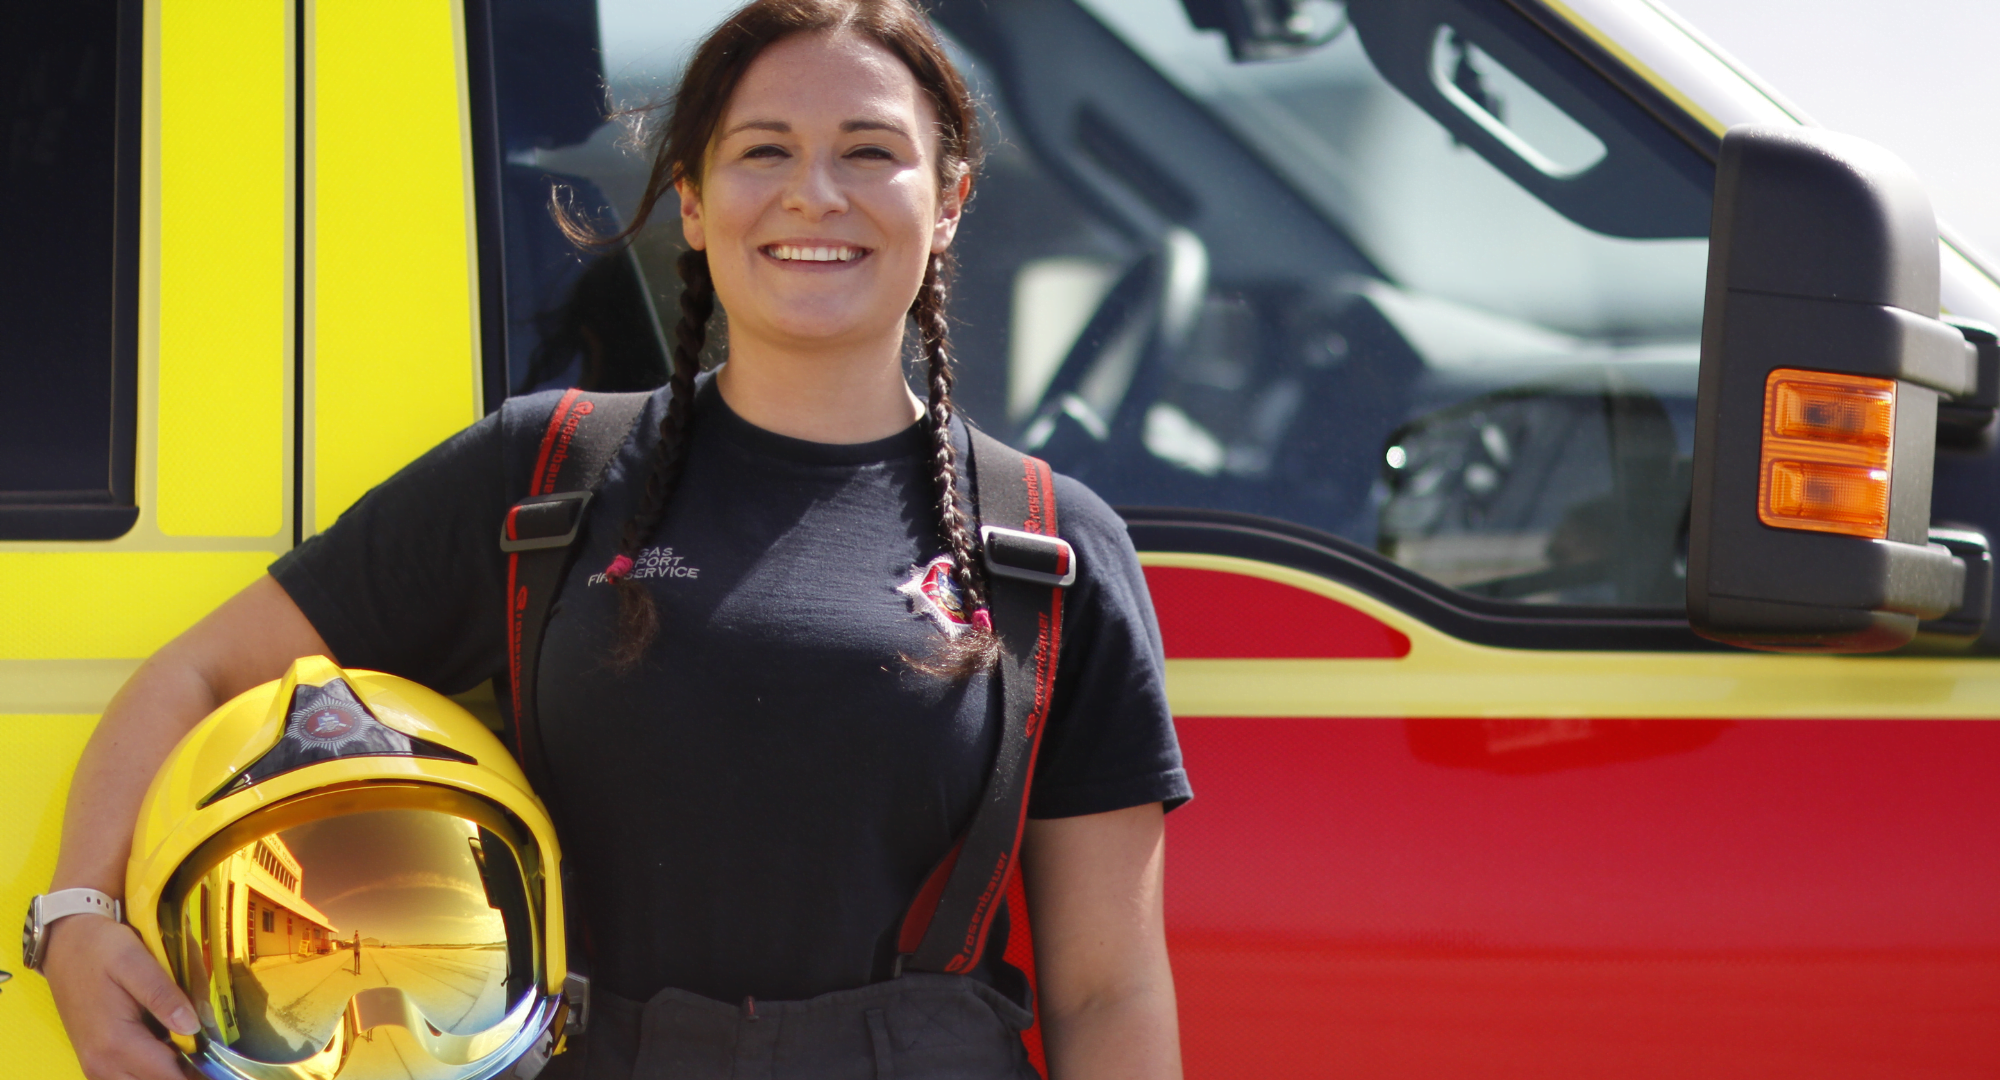 Airport Firefighter wearing firefighter kit and holding a protective yellow helmet whilst standing in front of a fire appliance